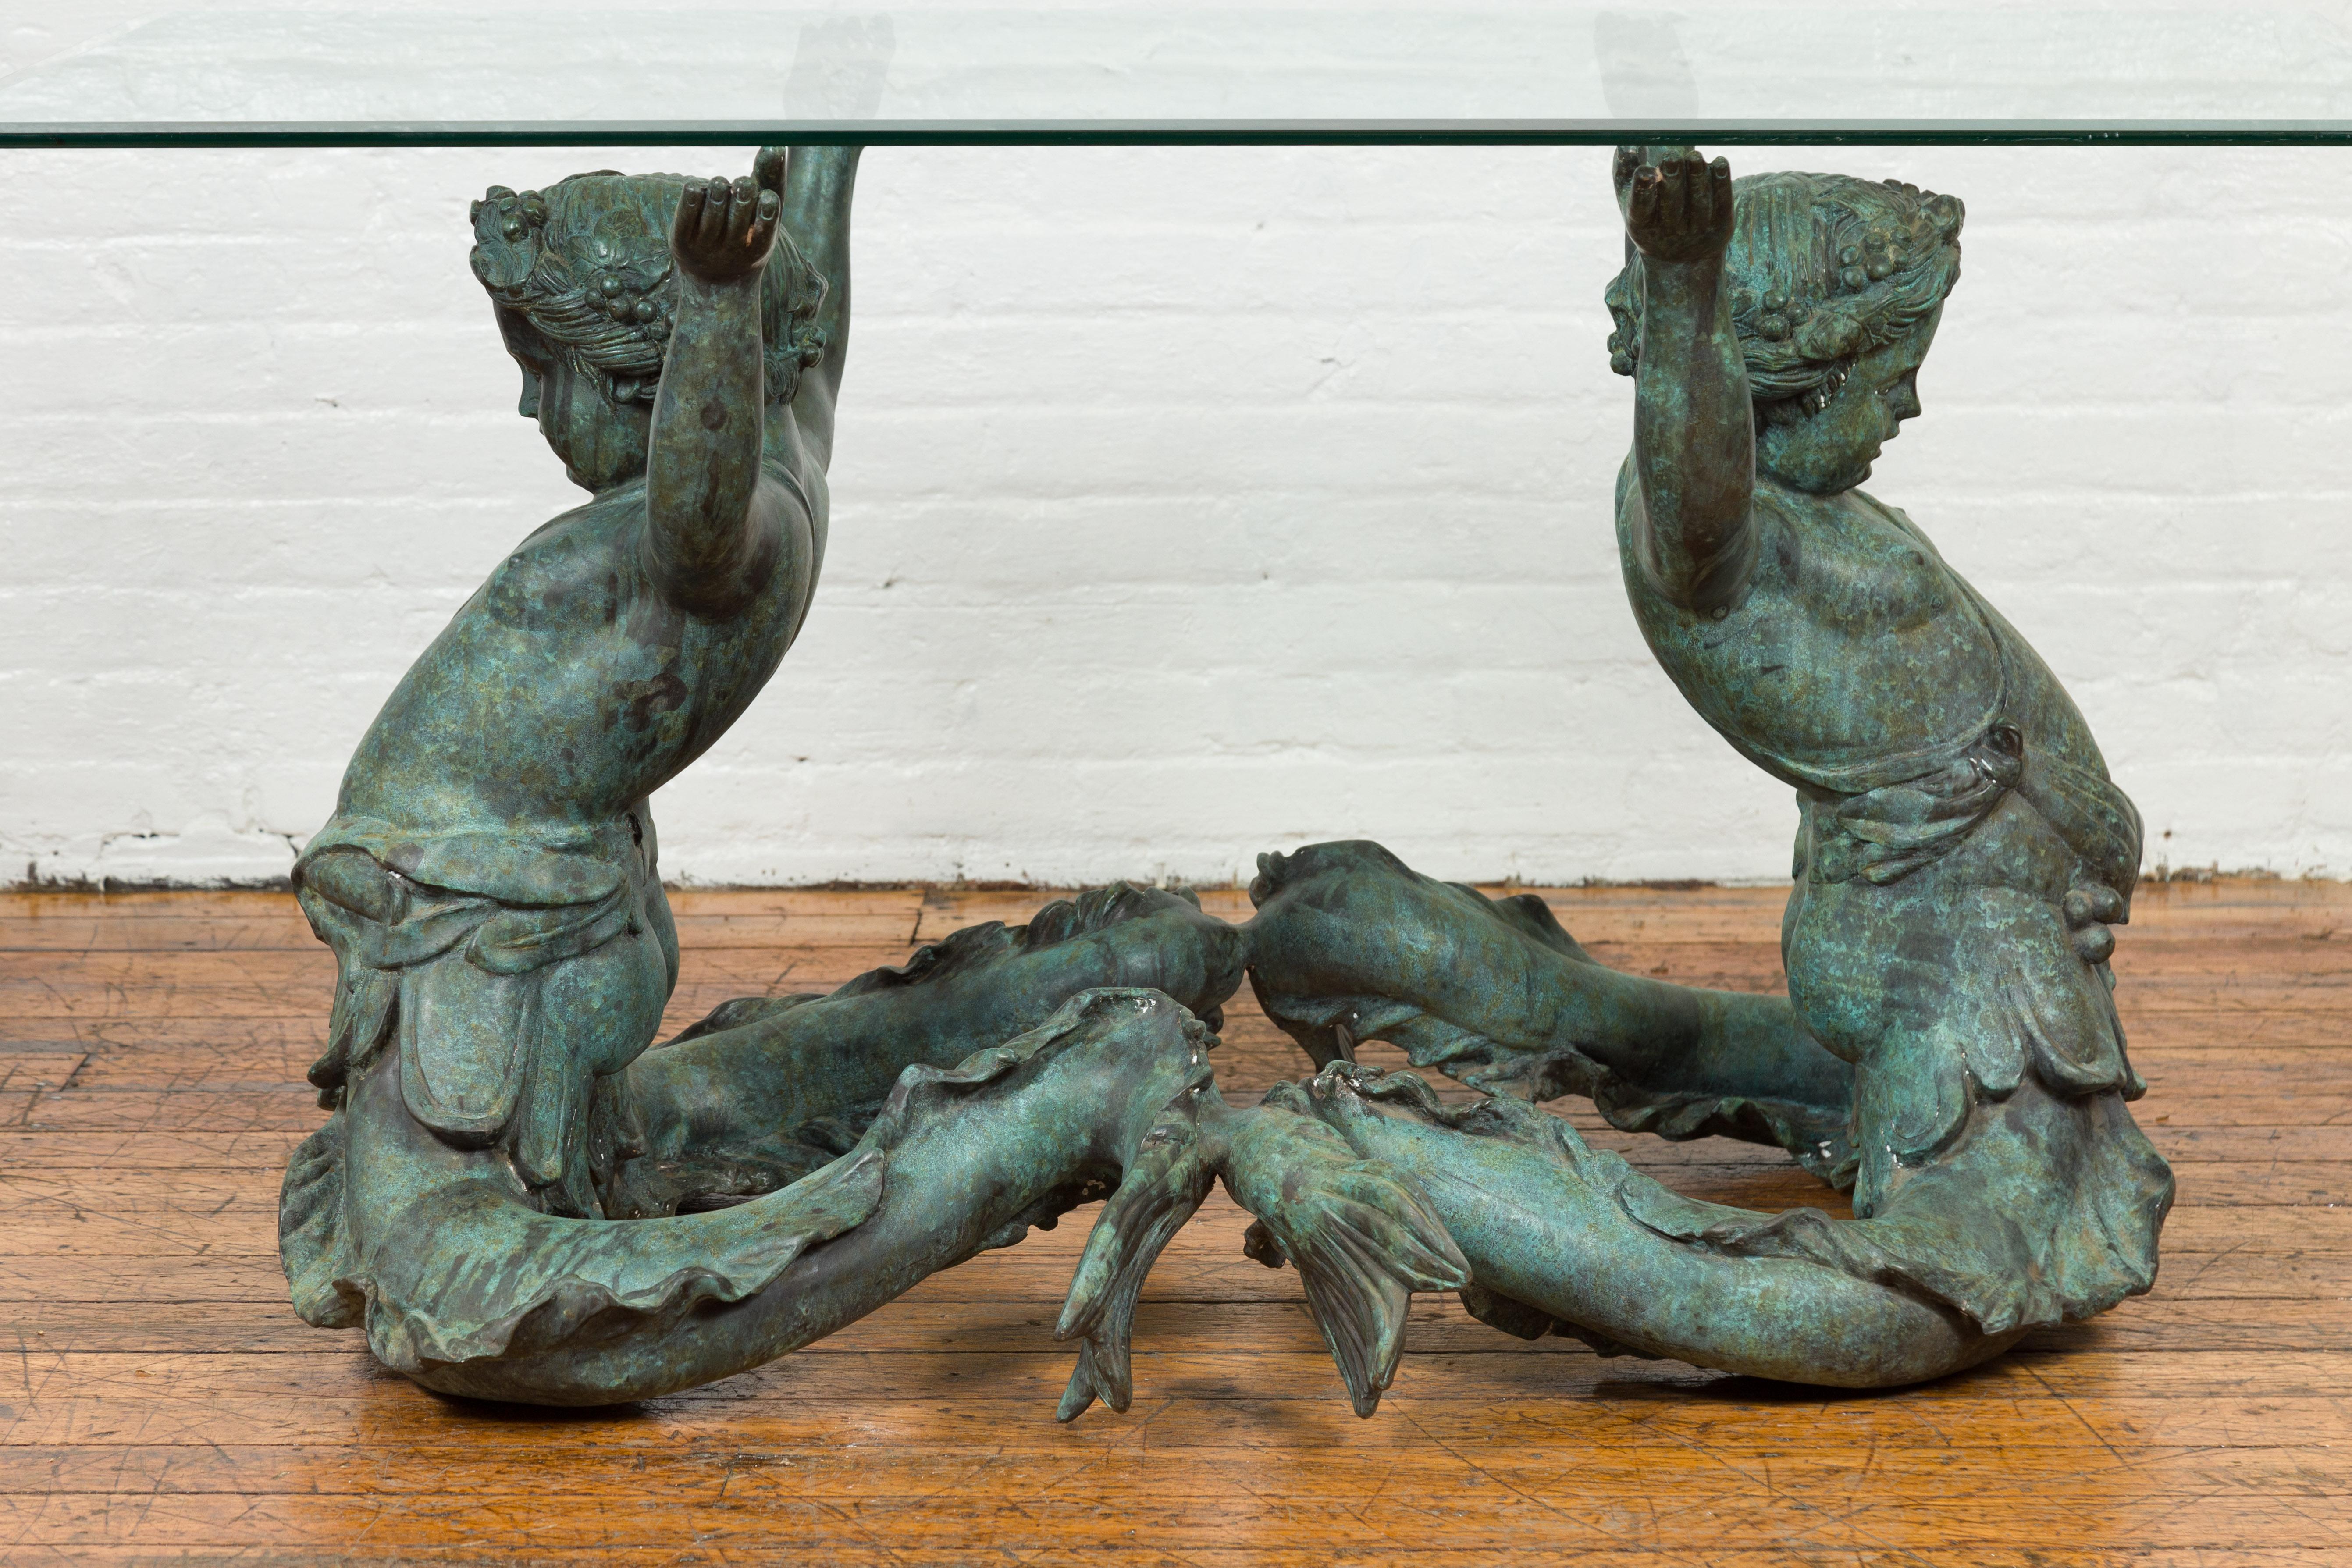 bronze dining table